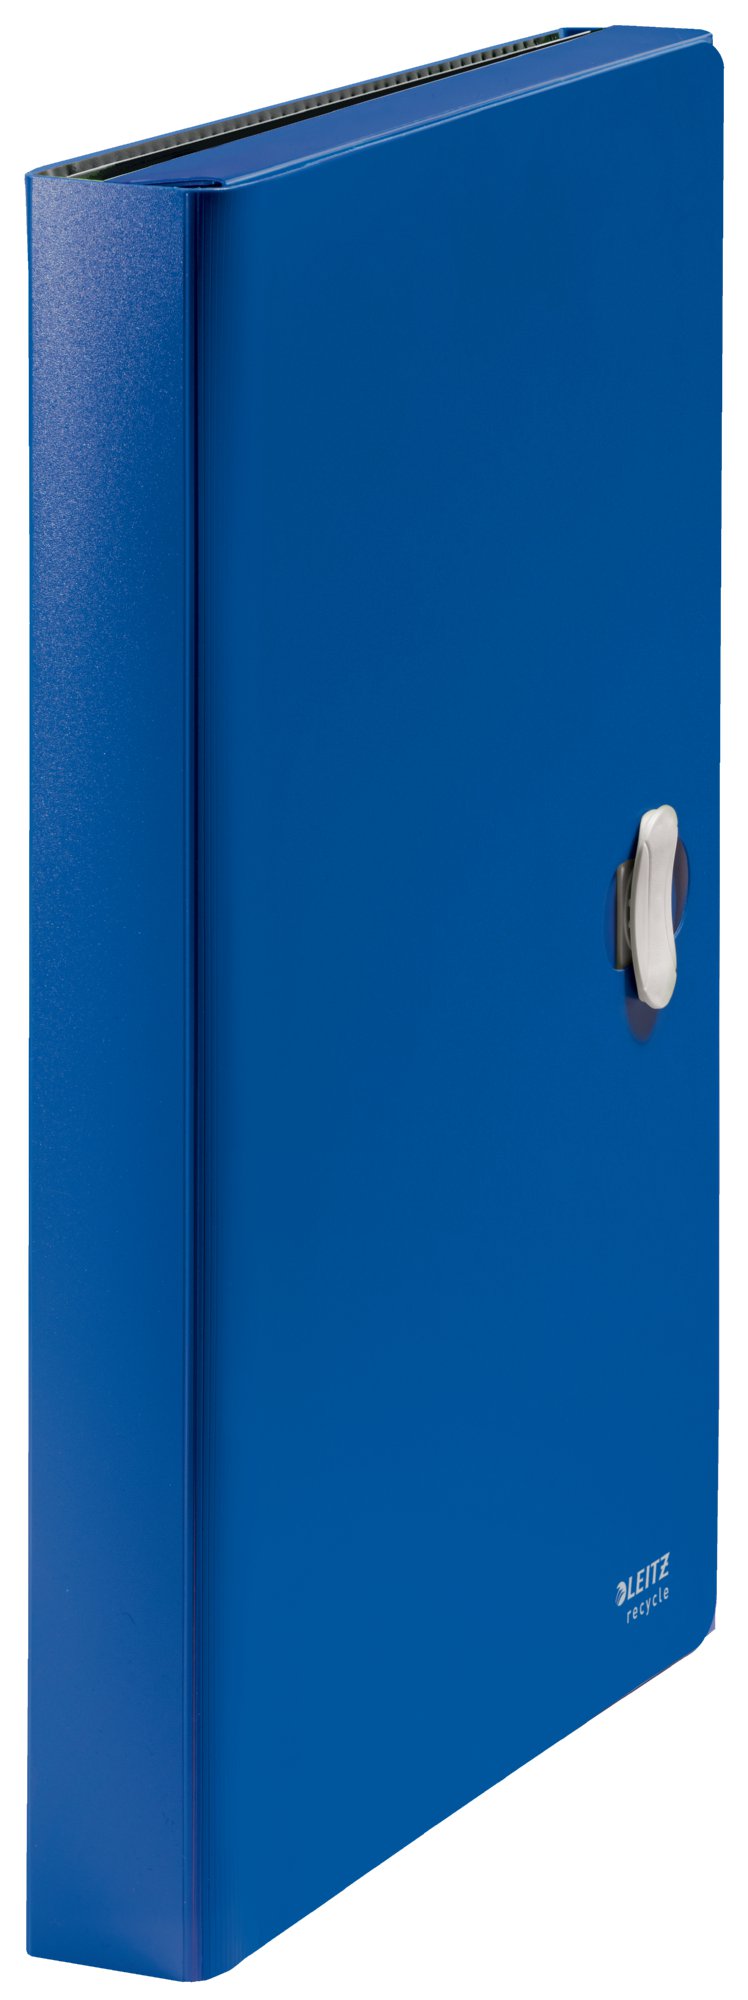 Leitz Recycle Polypropylene Expanding Concertina 5 Part File Blue 46240035 - NWT FM SOLUTIONS - YOUR CATERING WHOLESALER